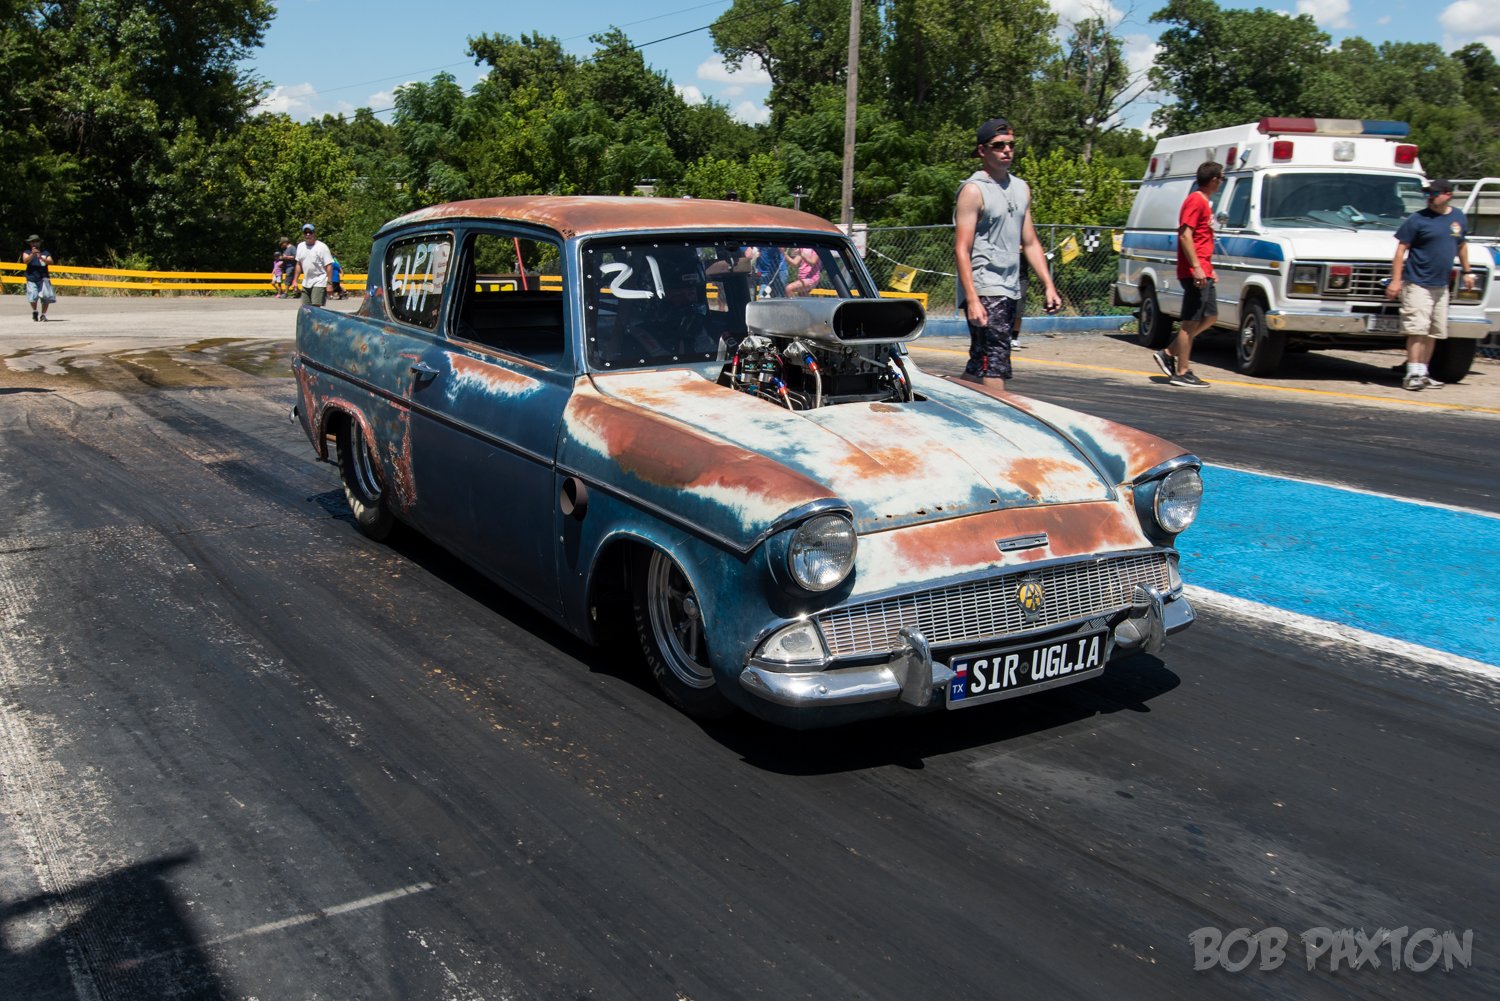 Kontinentals Day of the Drags 2016: Our Last Blast Of Photos From The Best Little Drag Race in Texas